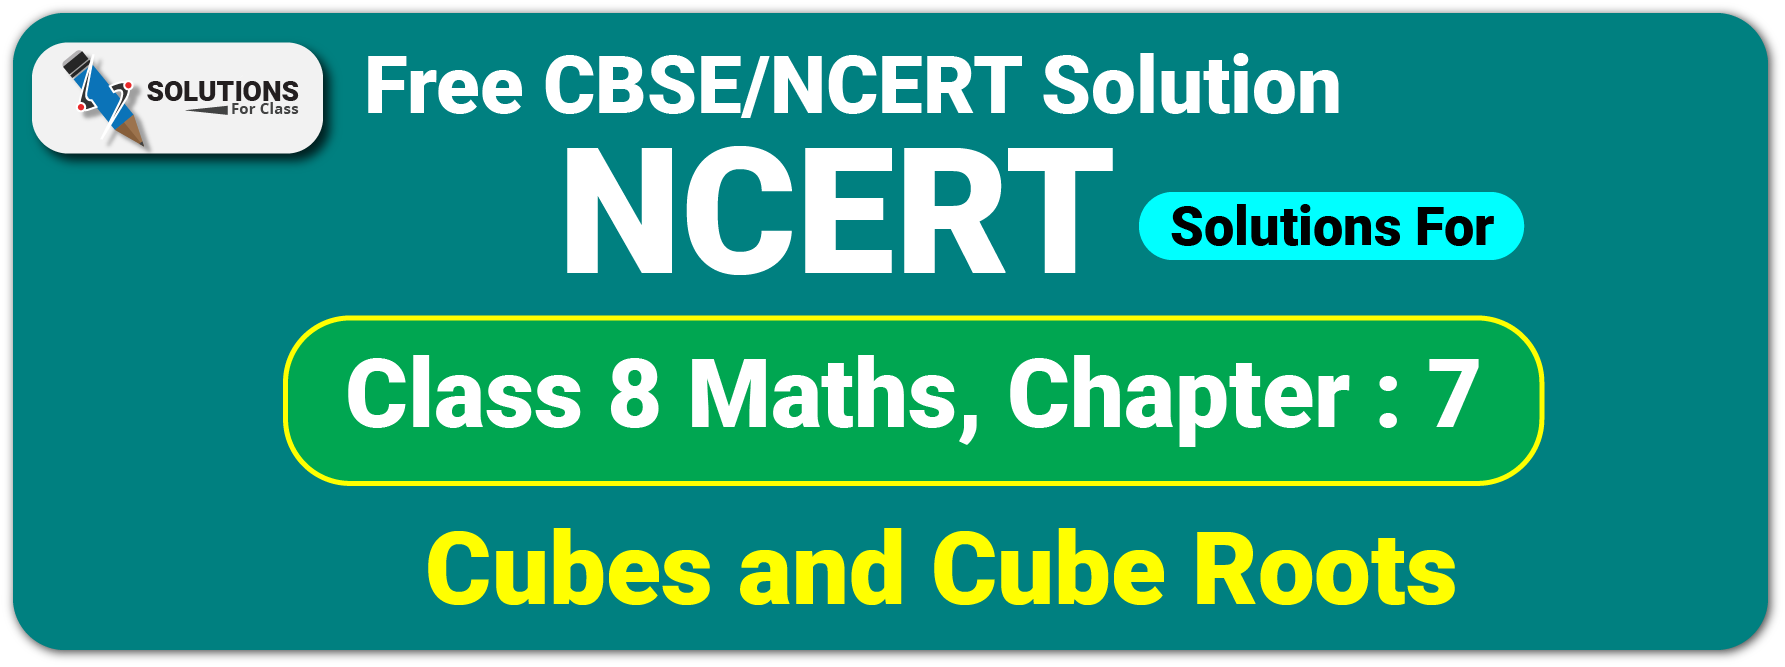 NCERT Solutions Class 8 Chapter 7, Cubes and Cube Roots